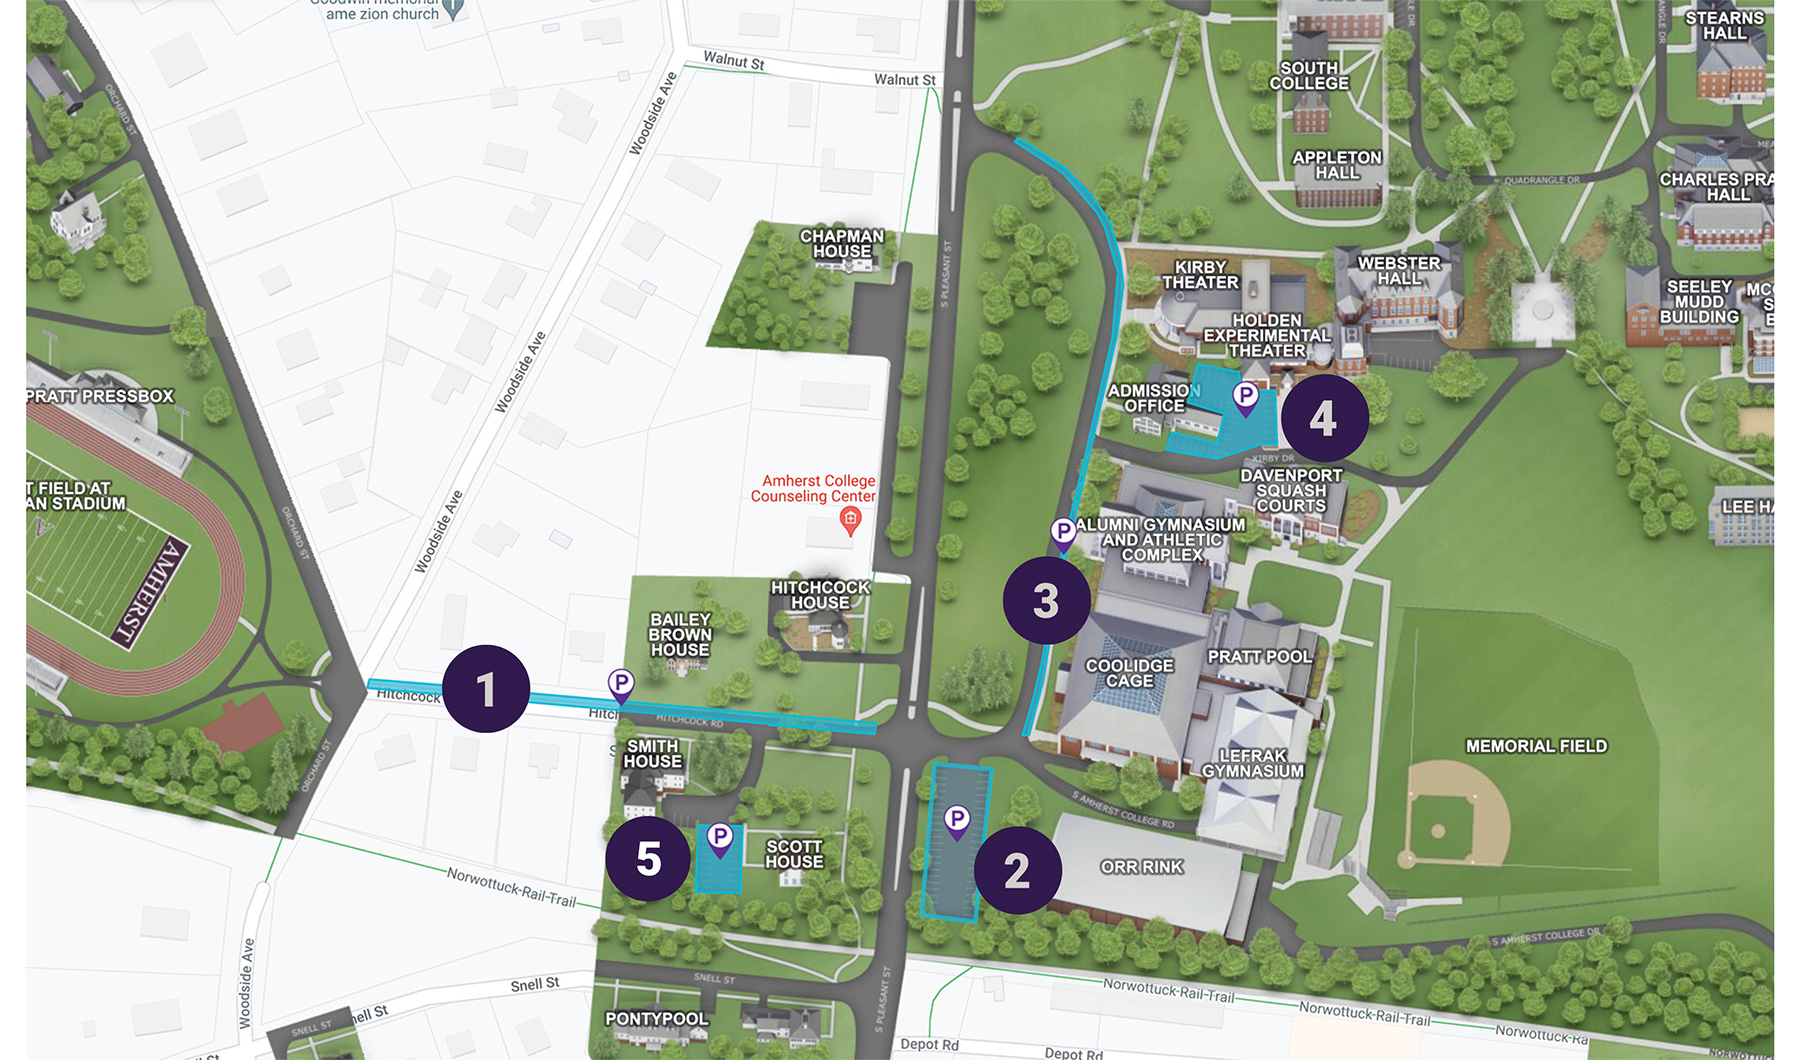 A map of parking spaces in south campus as described by accompanying text